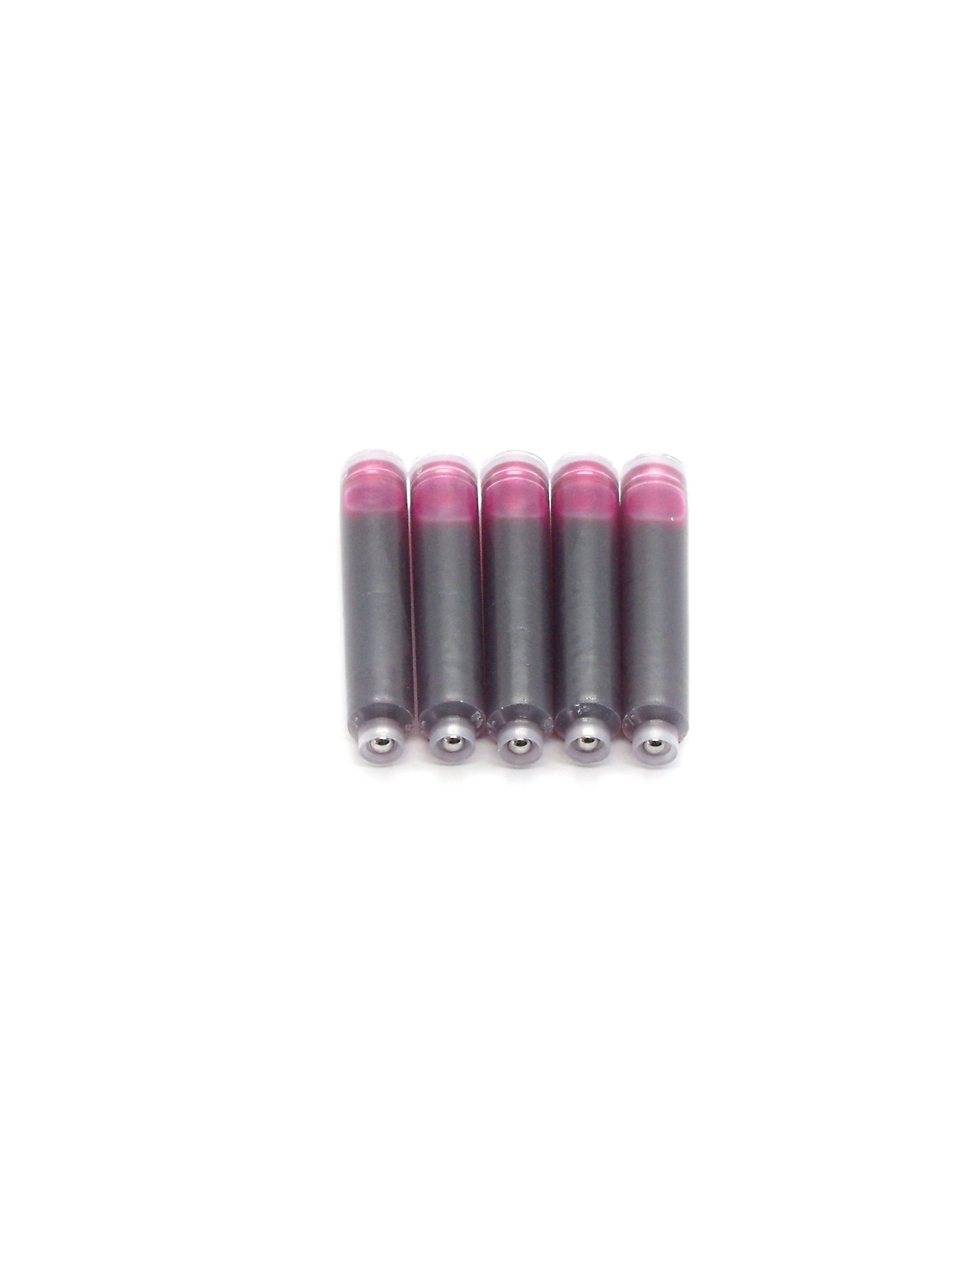 Top Ink Cartridges For Franklin Covey Fountain Pens (Pink)